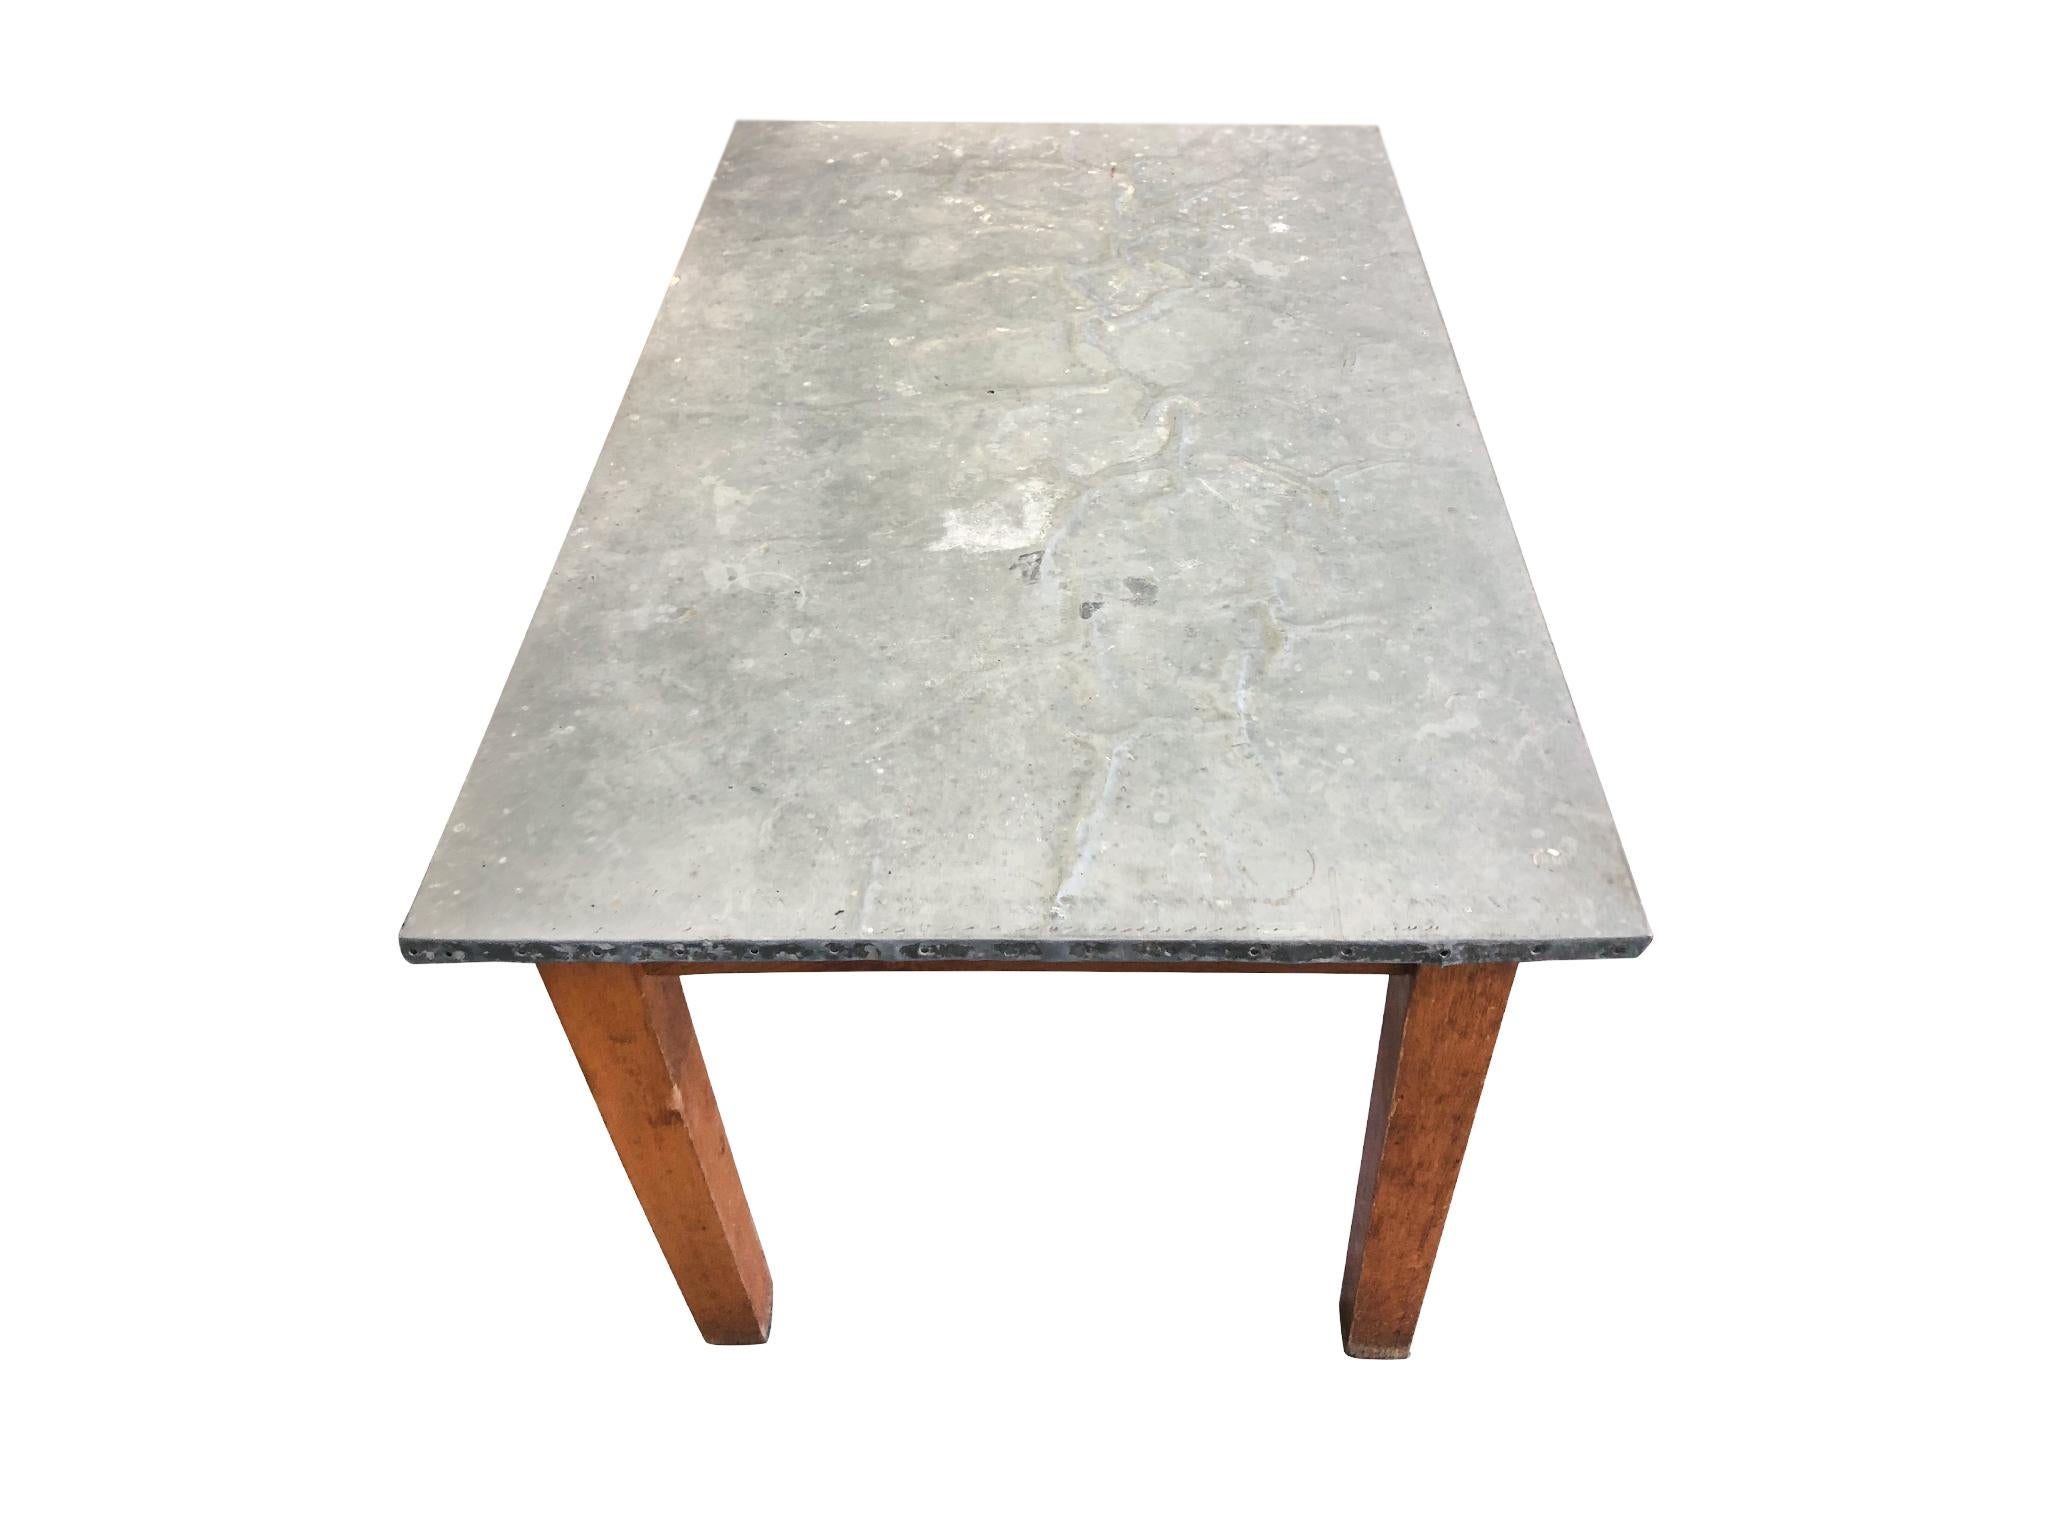 Hand-Crafted 20th Century Industrial Table with Zinc Top